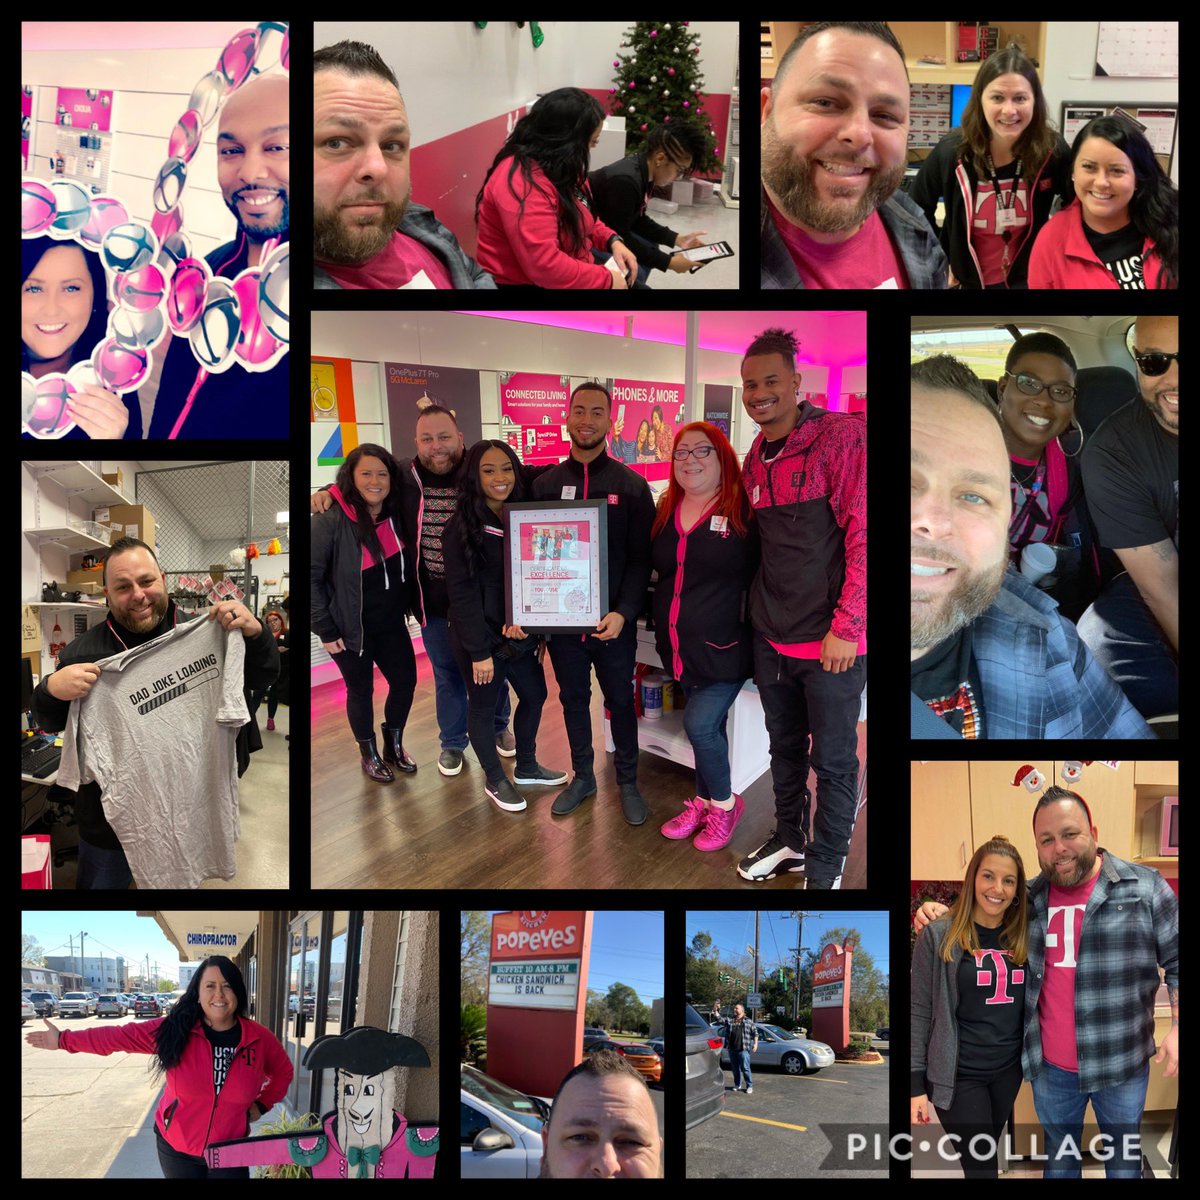 NEVER a dull moment when @TonyCBerger is in town! We visited every store in Nola, had my 1st experience going to Lake Charles & Lafayette (aka Popeyes buffet) and got to spend quality time with the best people around! Thanks Boss!
#gulfcoastproud 💗